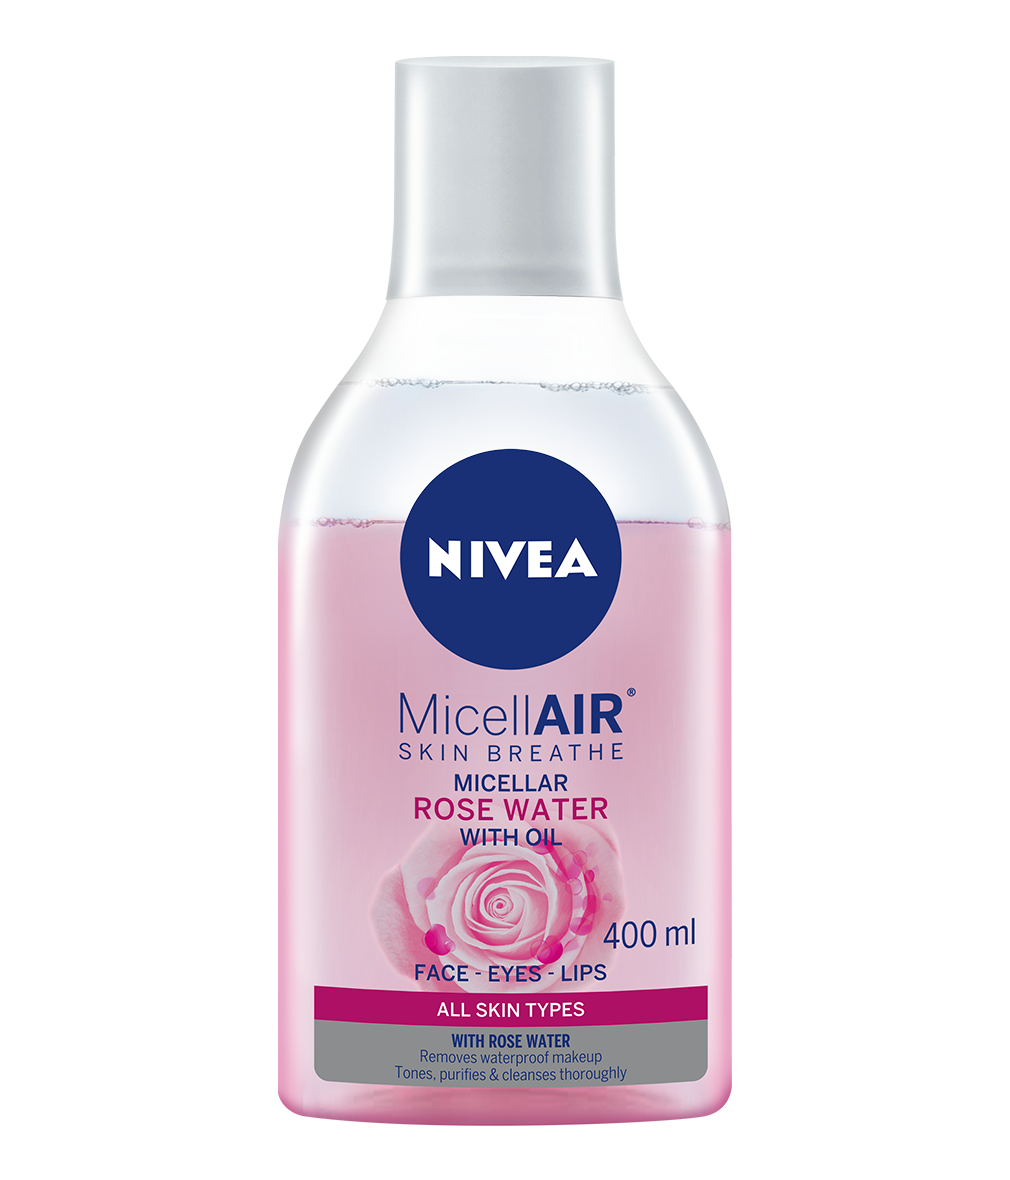 Nivea MicellAIR Skin Breathe Rose Water With Oil 400ml